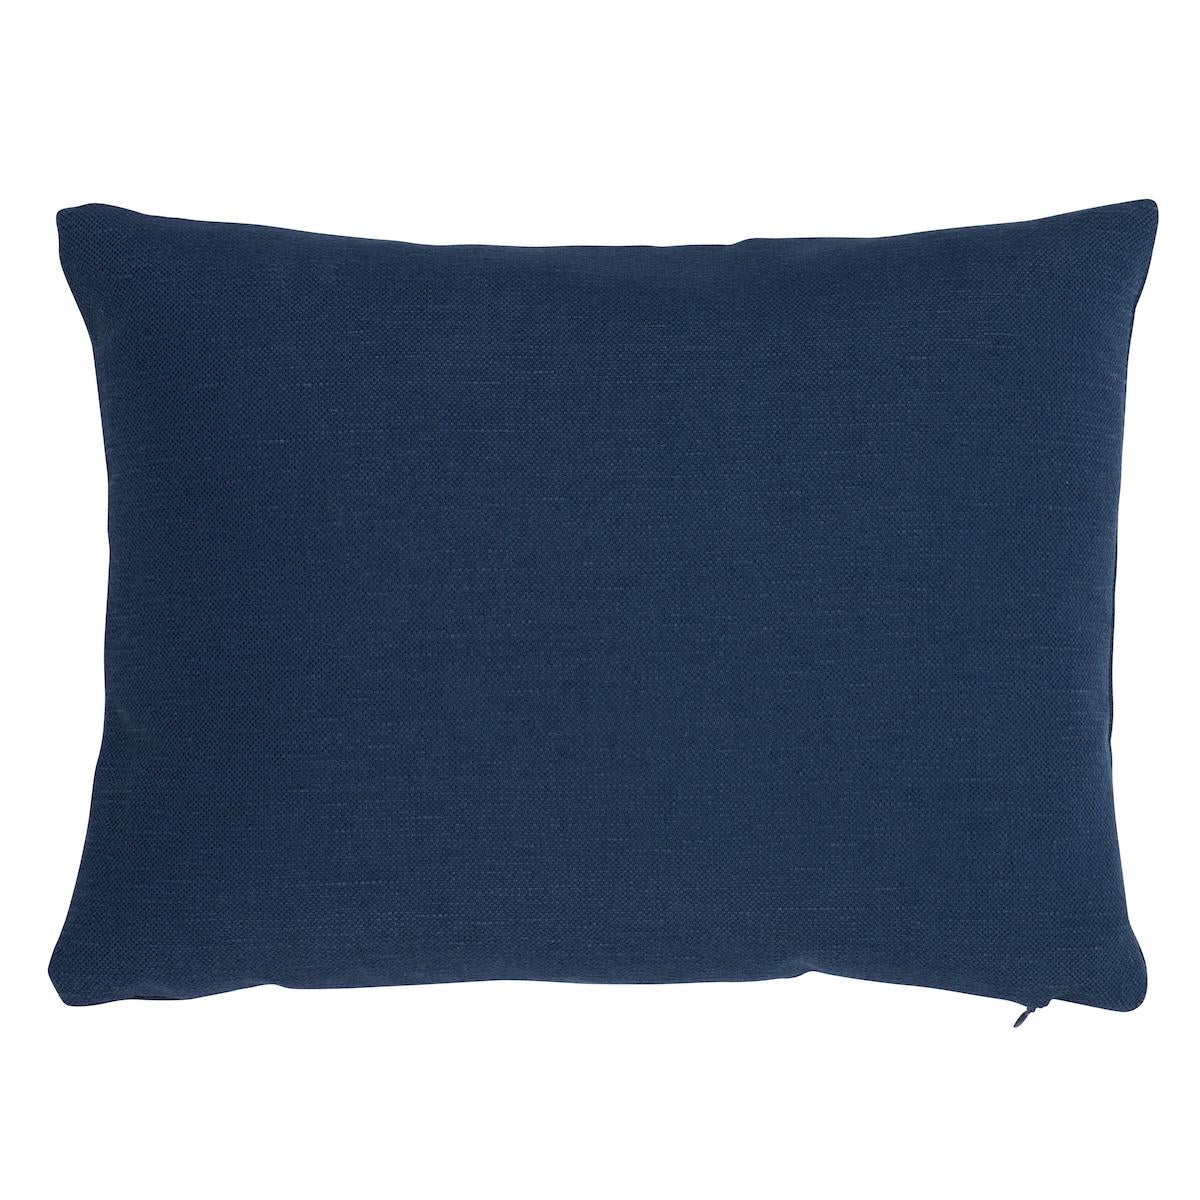 This pillow features Backgammon Tape by Mary McDonaldwith a knife edge finish. Mary McDonald was inspired by the alternating colors, pointed pips and circular pieces associated with backgammon when she created this fun, sophisticated design. Body of